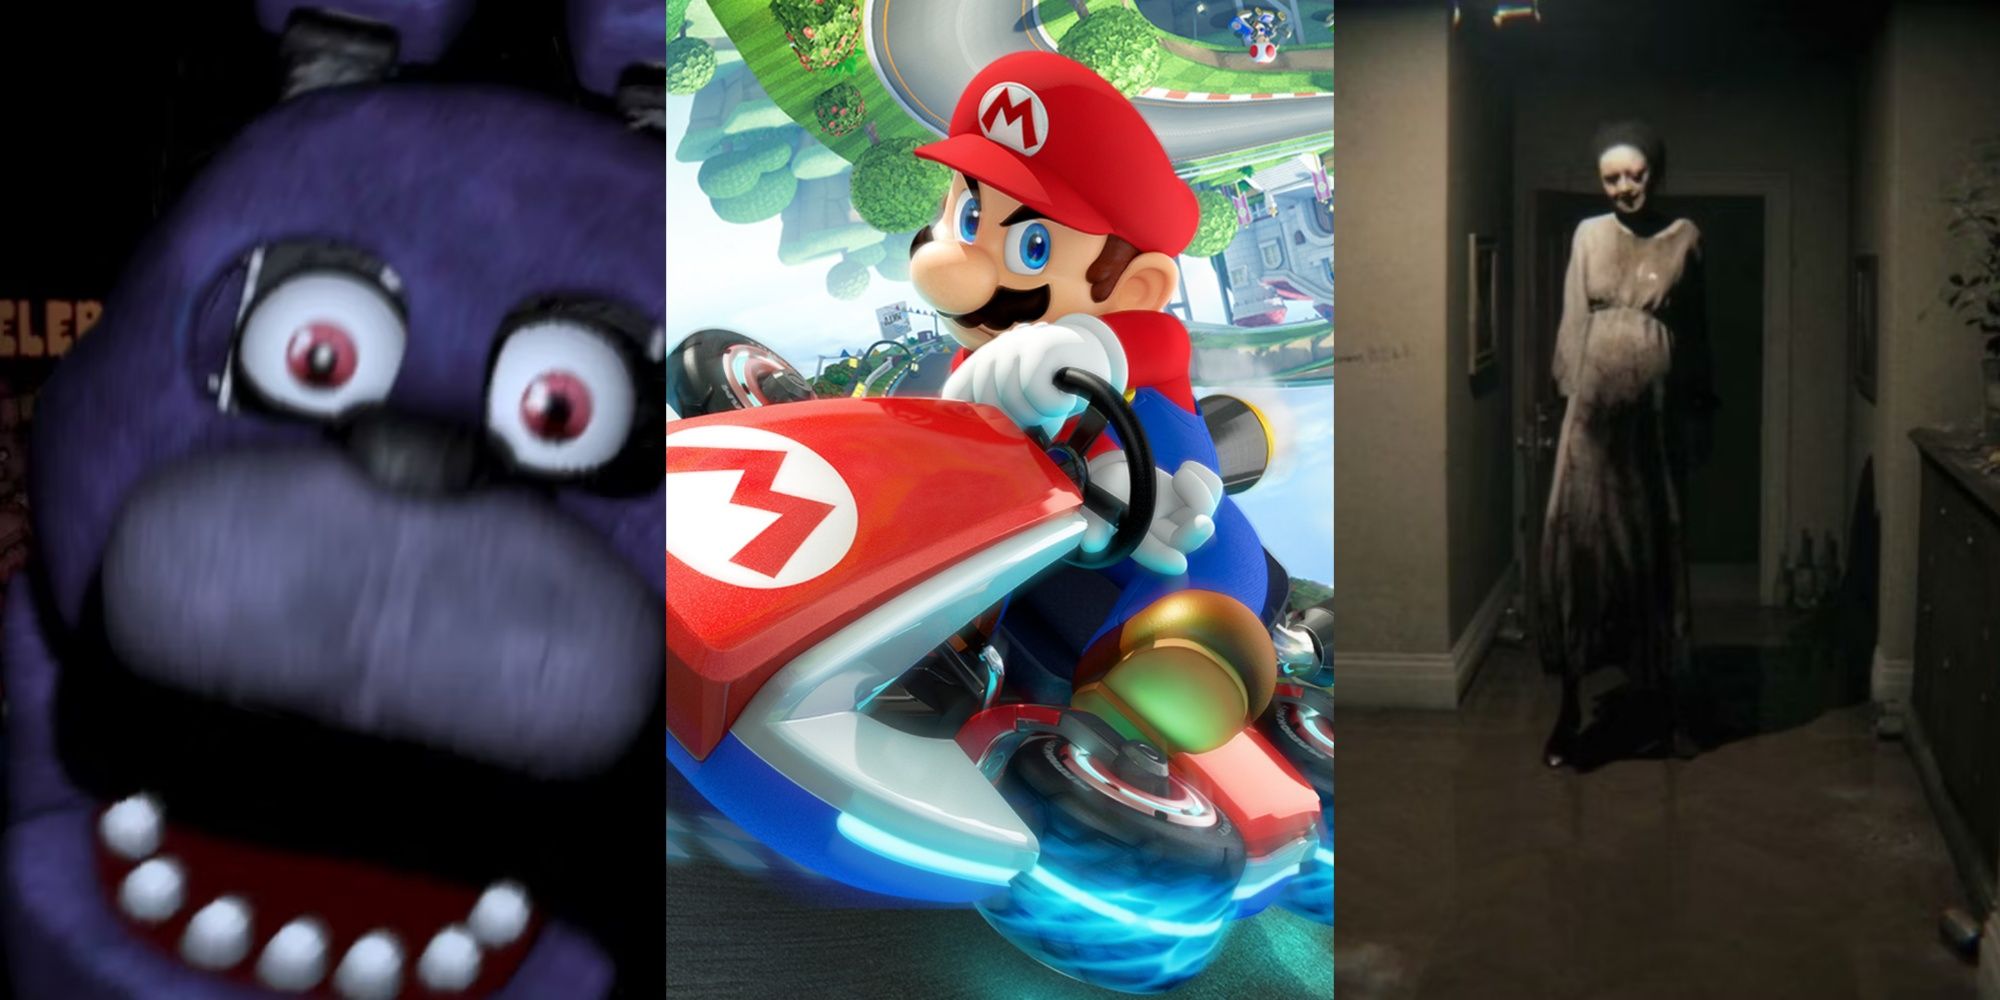 Bonnie from Five Nights At Freddy's, box art to Mario Kart 8, and Lisa from P.T.